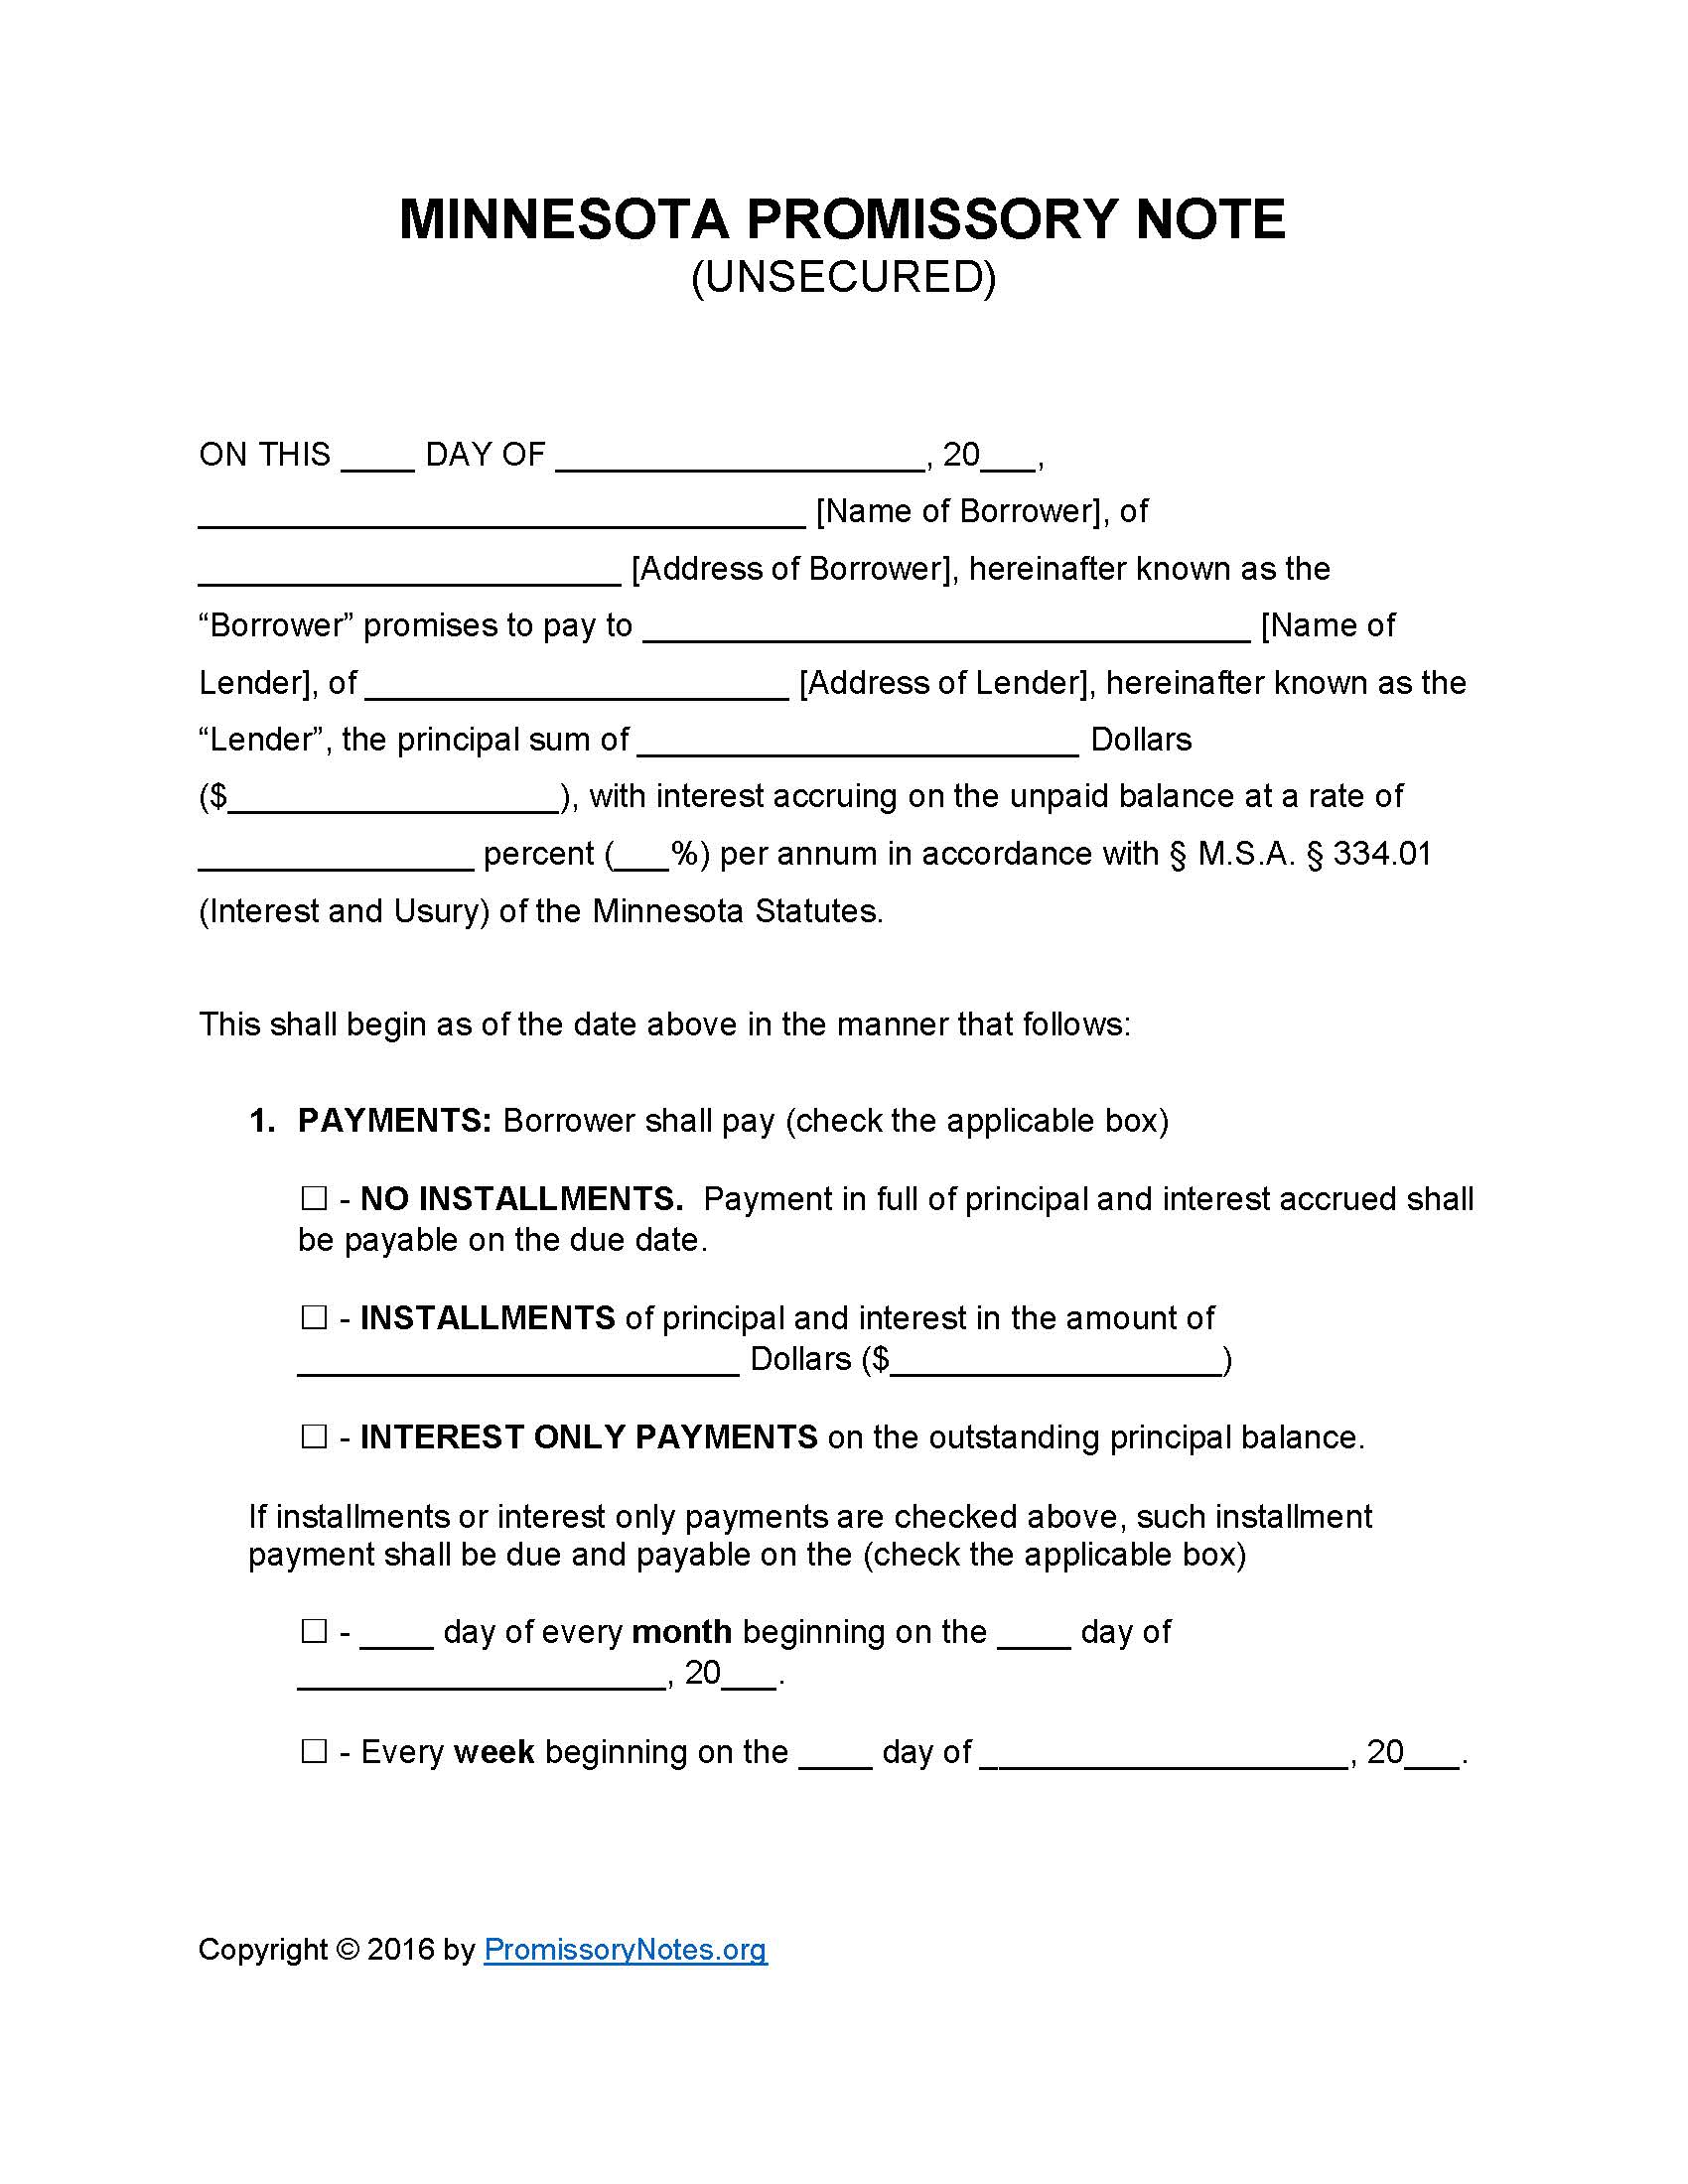 minnesota-unsecured-promissory-note-form